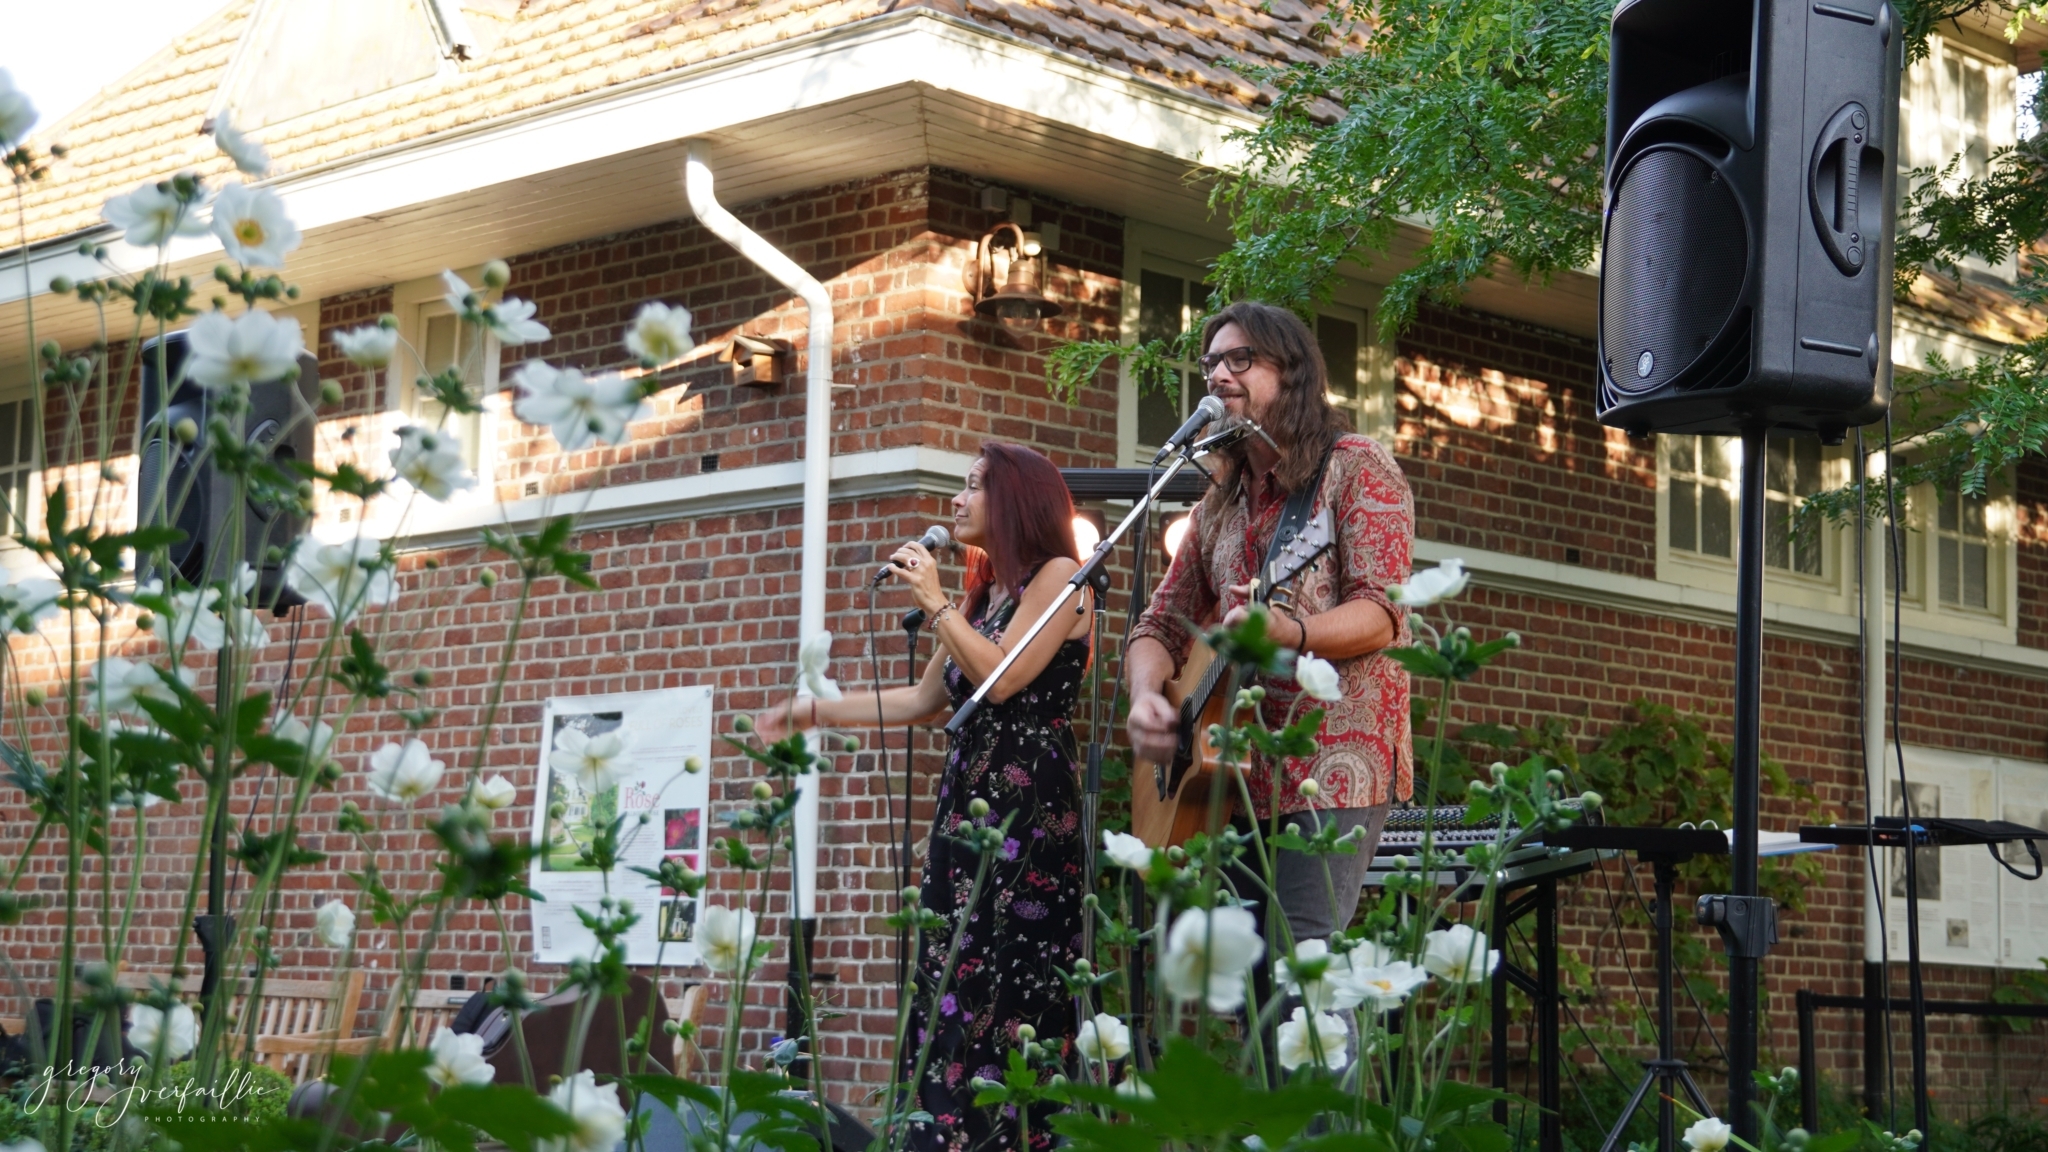 Lun Acoustic optreden tuin Talbot House Poperinge foto Gregory Verfaillie 2